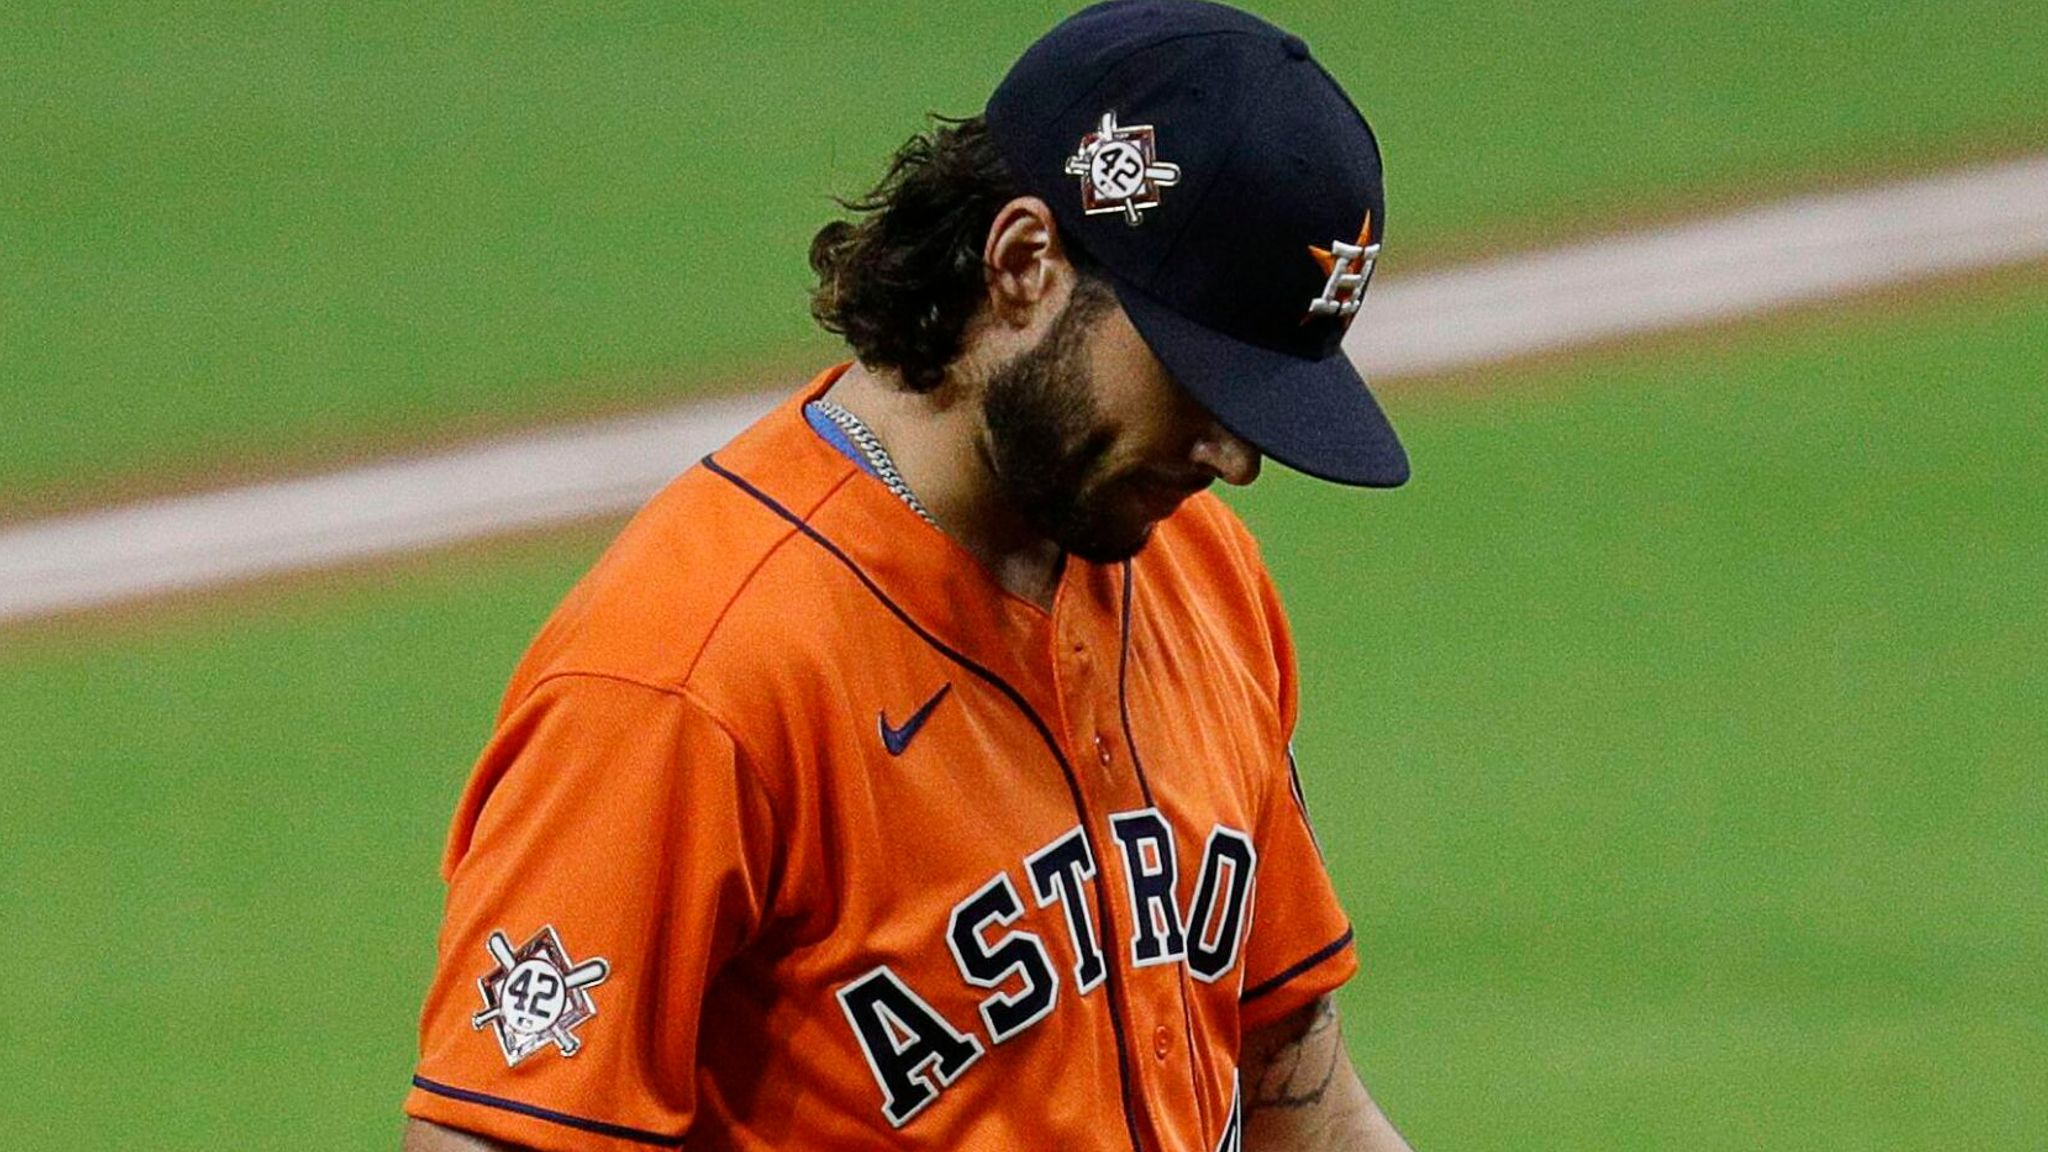 Lance McCullers Jr. expects Astros 'to come together as a group